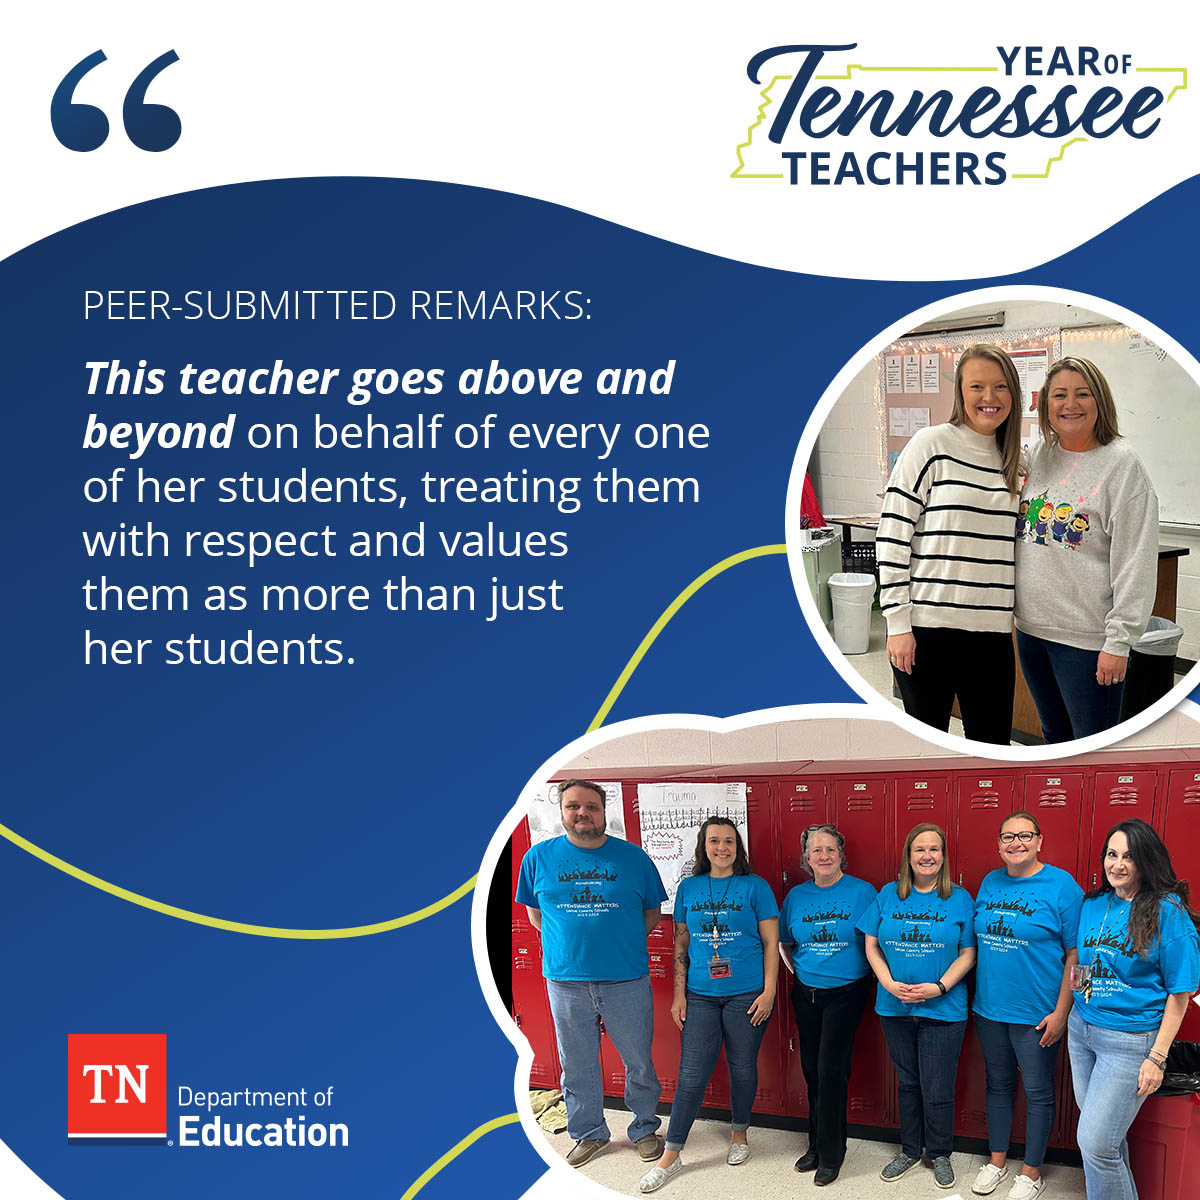 We are thrilled to spotlight Union County Schools' Heather Wallace, nominated by her peers for the passion and commitment she shows her students every day. Your dedication to students is appreciated! #TNSupportsTeachers